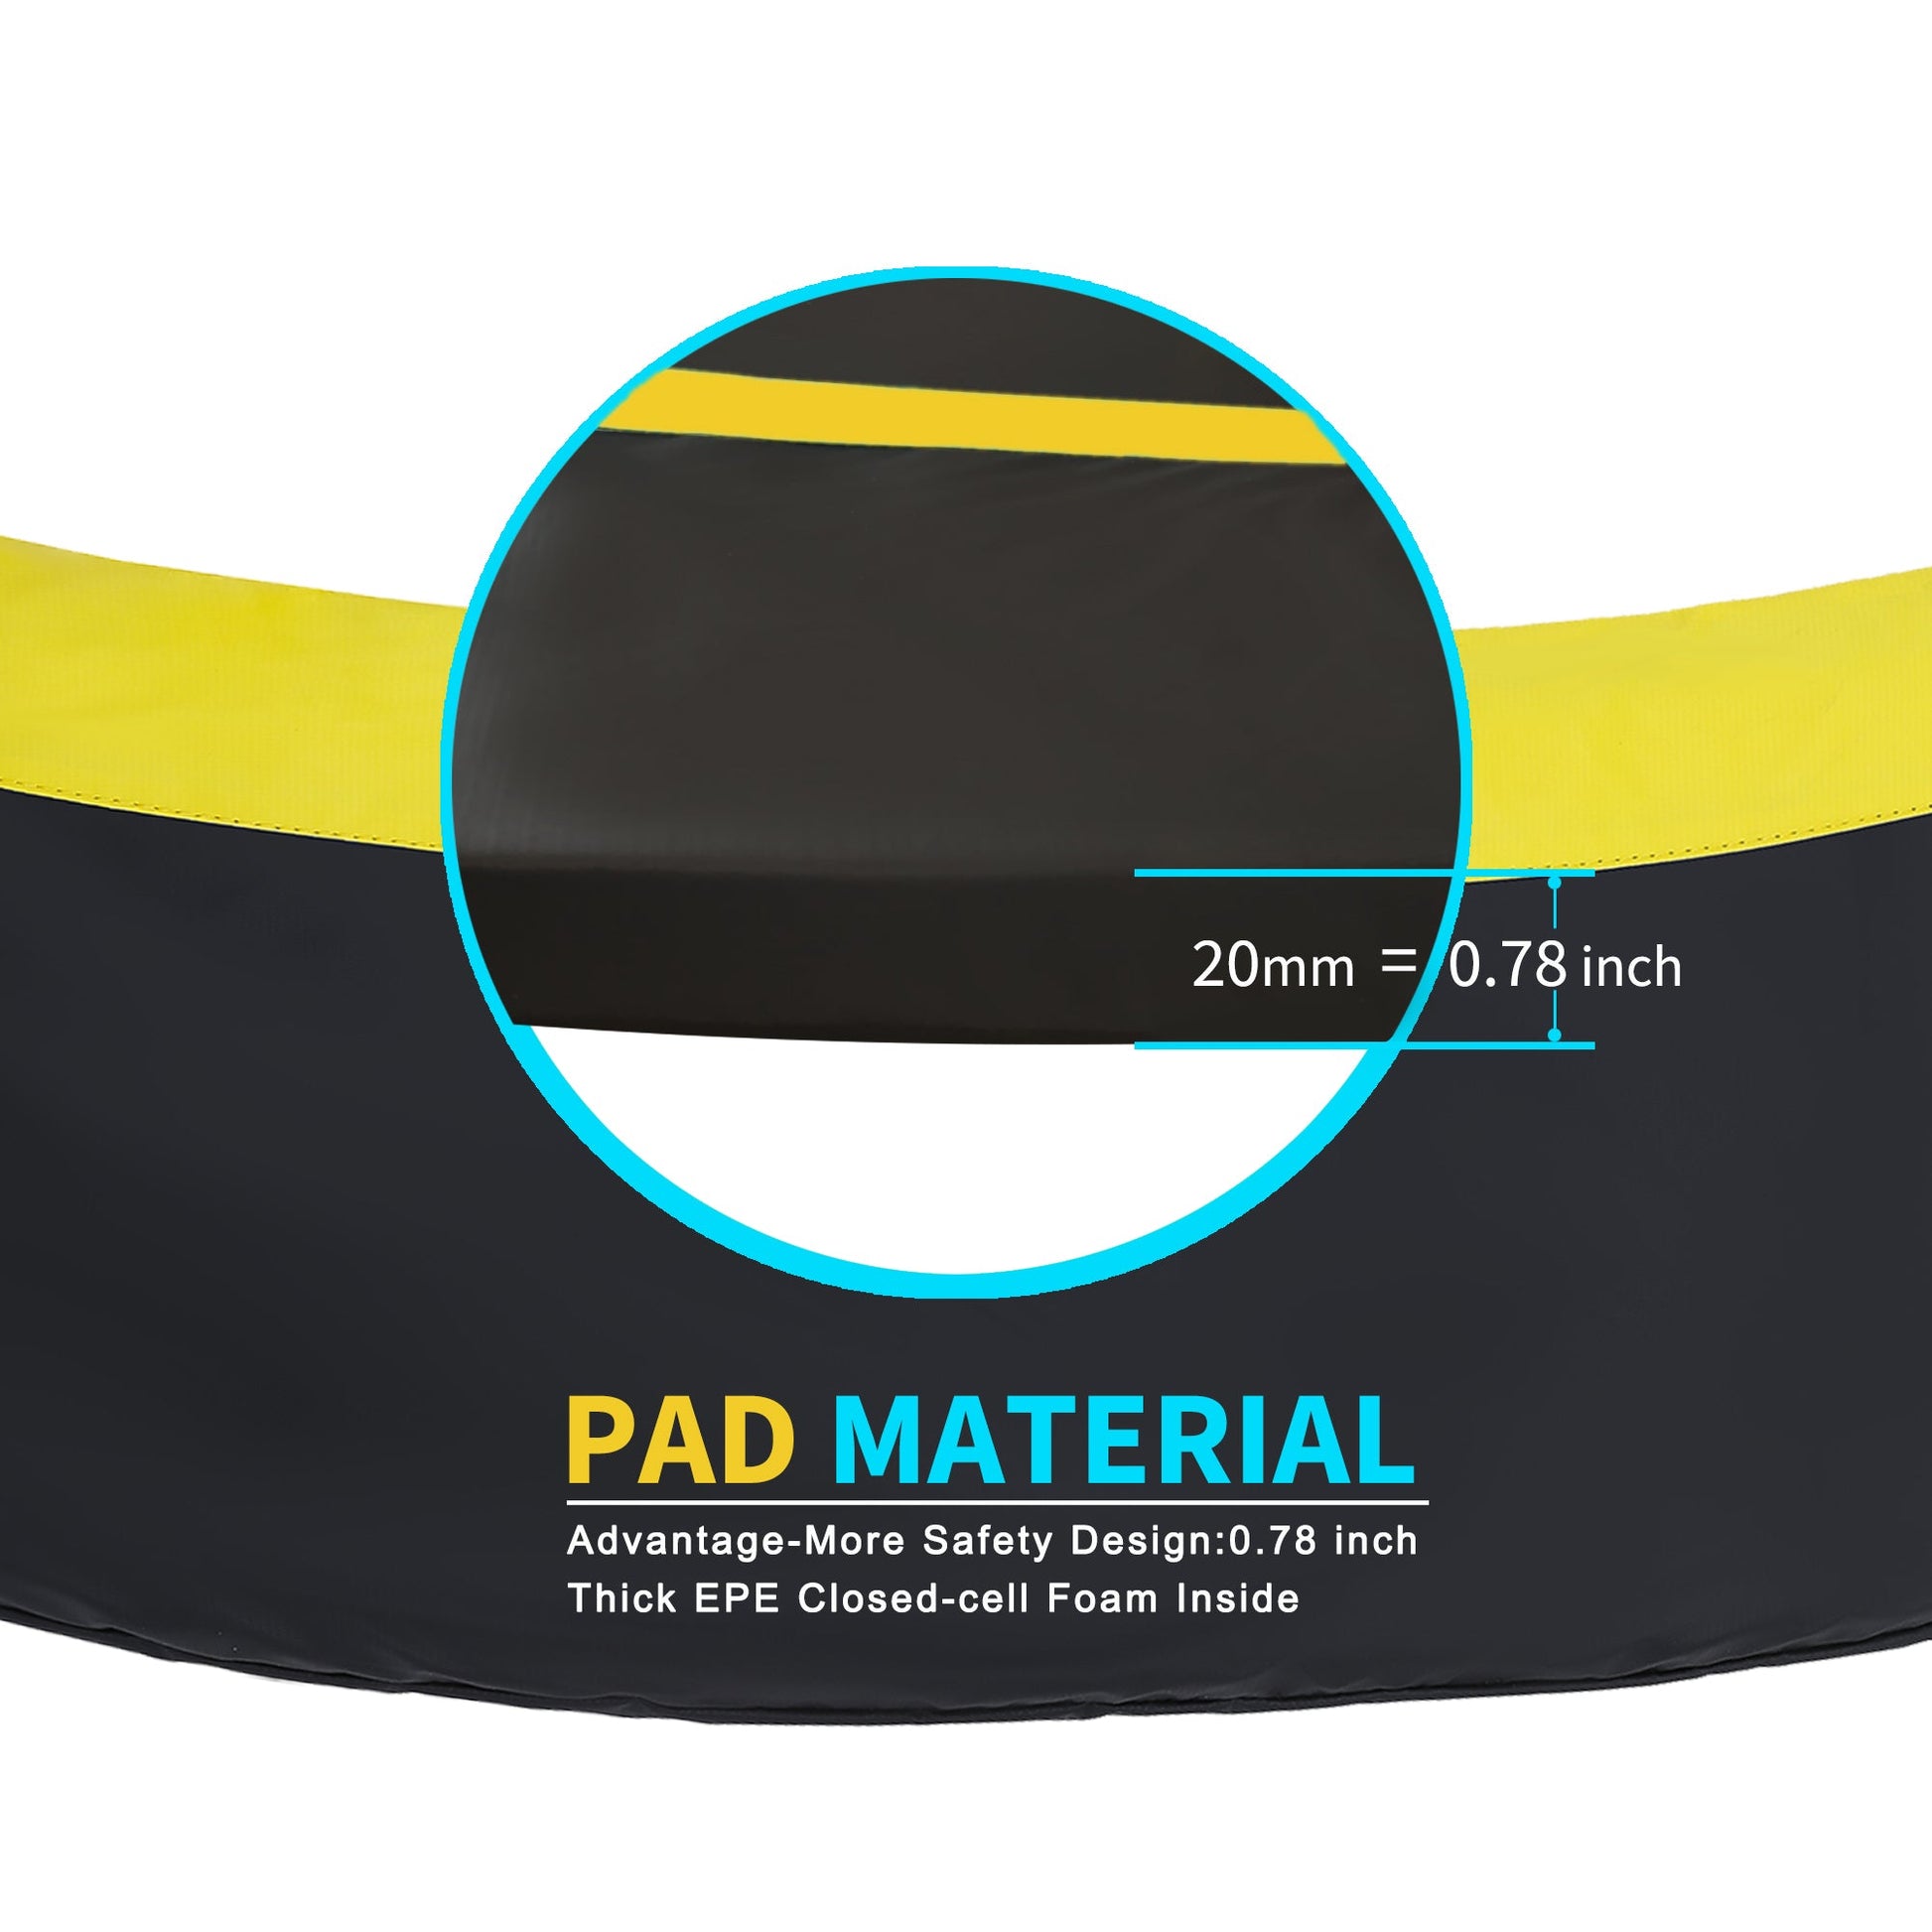 SkyBound Universal Replacement Trampoline Safety Pad - Extra Thick Foam Pad, Comfortable, Long Lasting, and Water-Resistant - Black/Yellow Color - 14ft